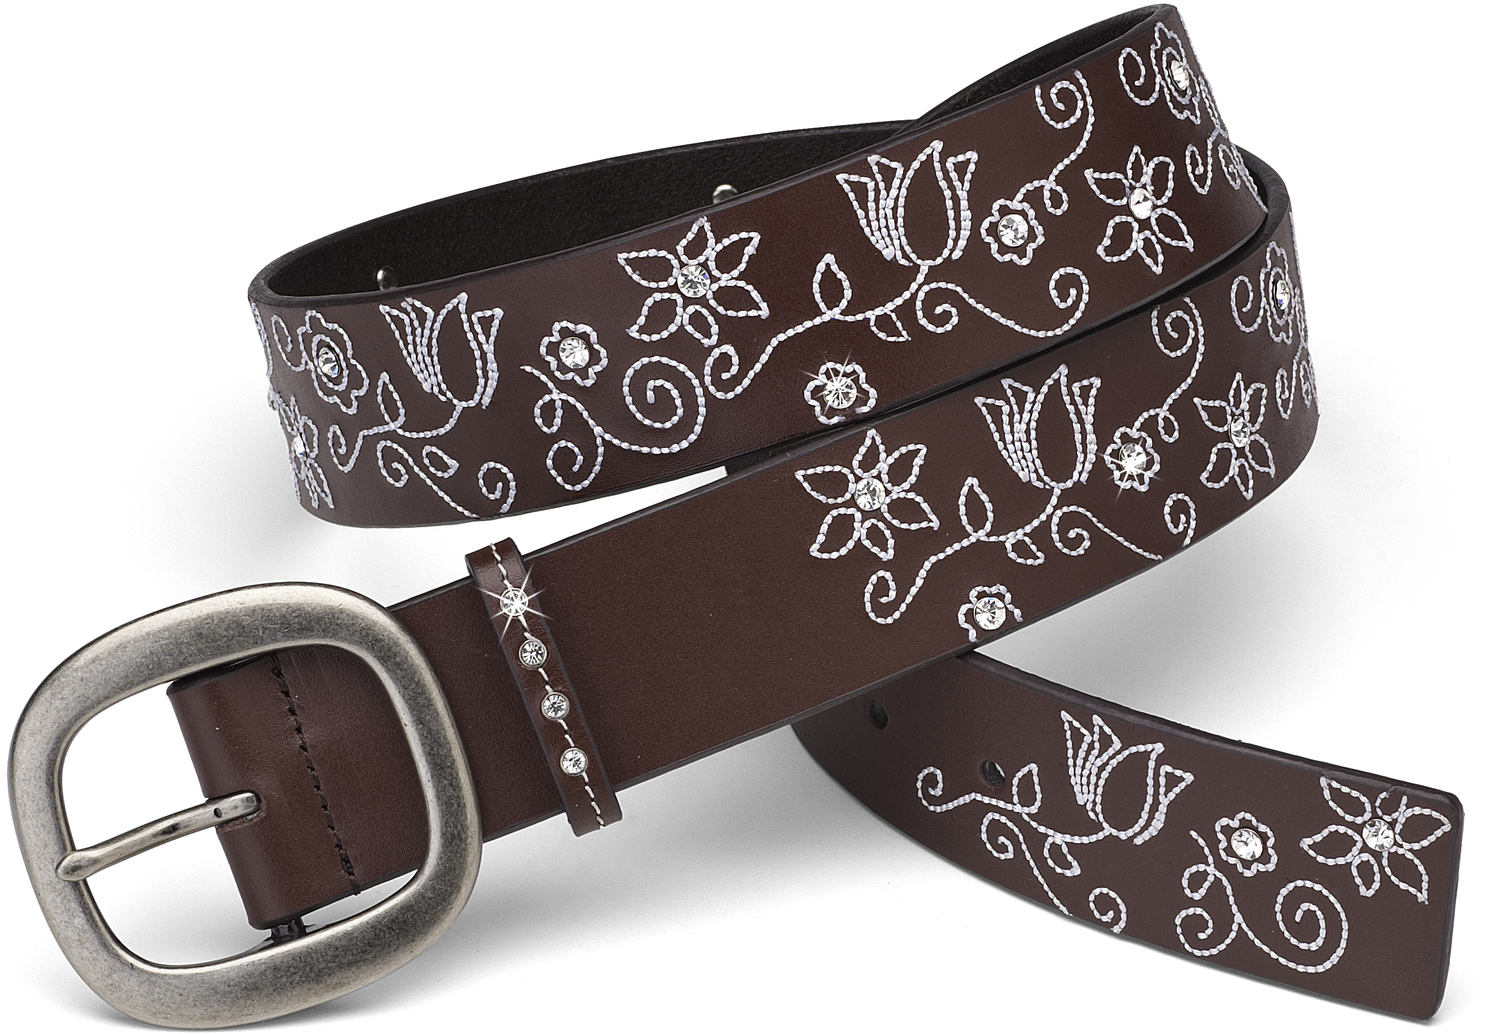 White Floral Stitched Belt by LAYLA - White Floral Stitched Belt - 43" Brown Leather & Gem